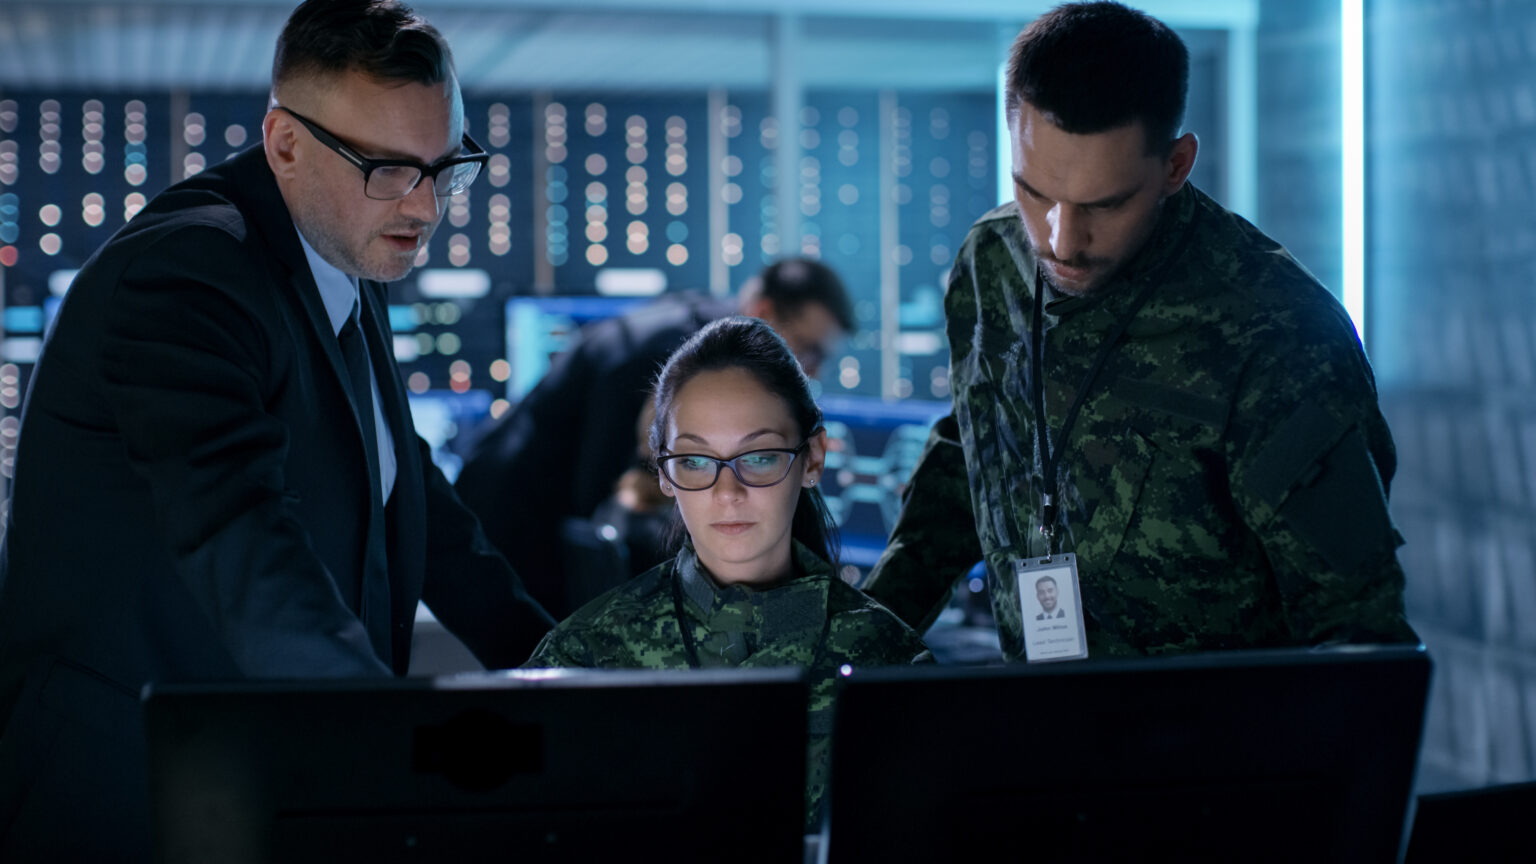 This is about a government surveillance agency and military joint operation. male agent, female and male military officers working at system control center, illustrating Information Security topic